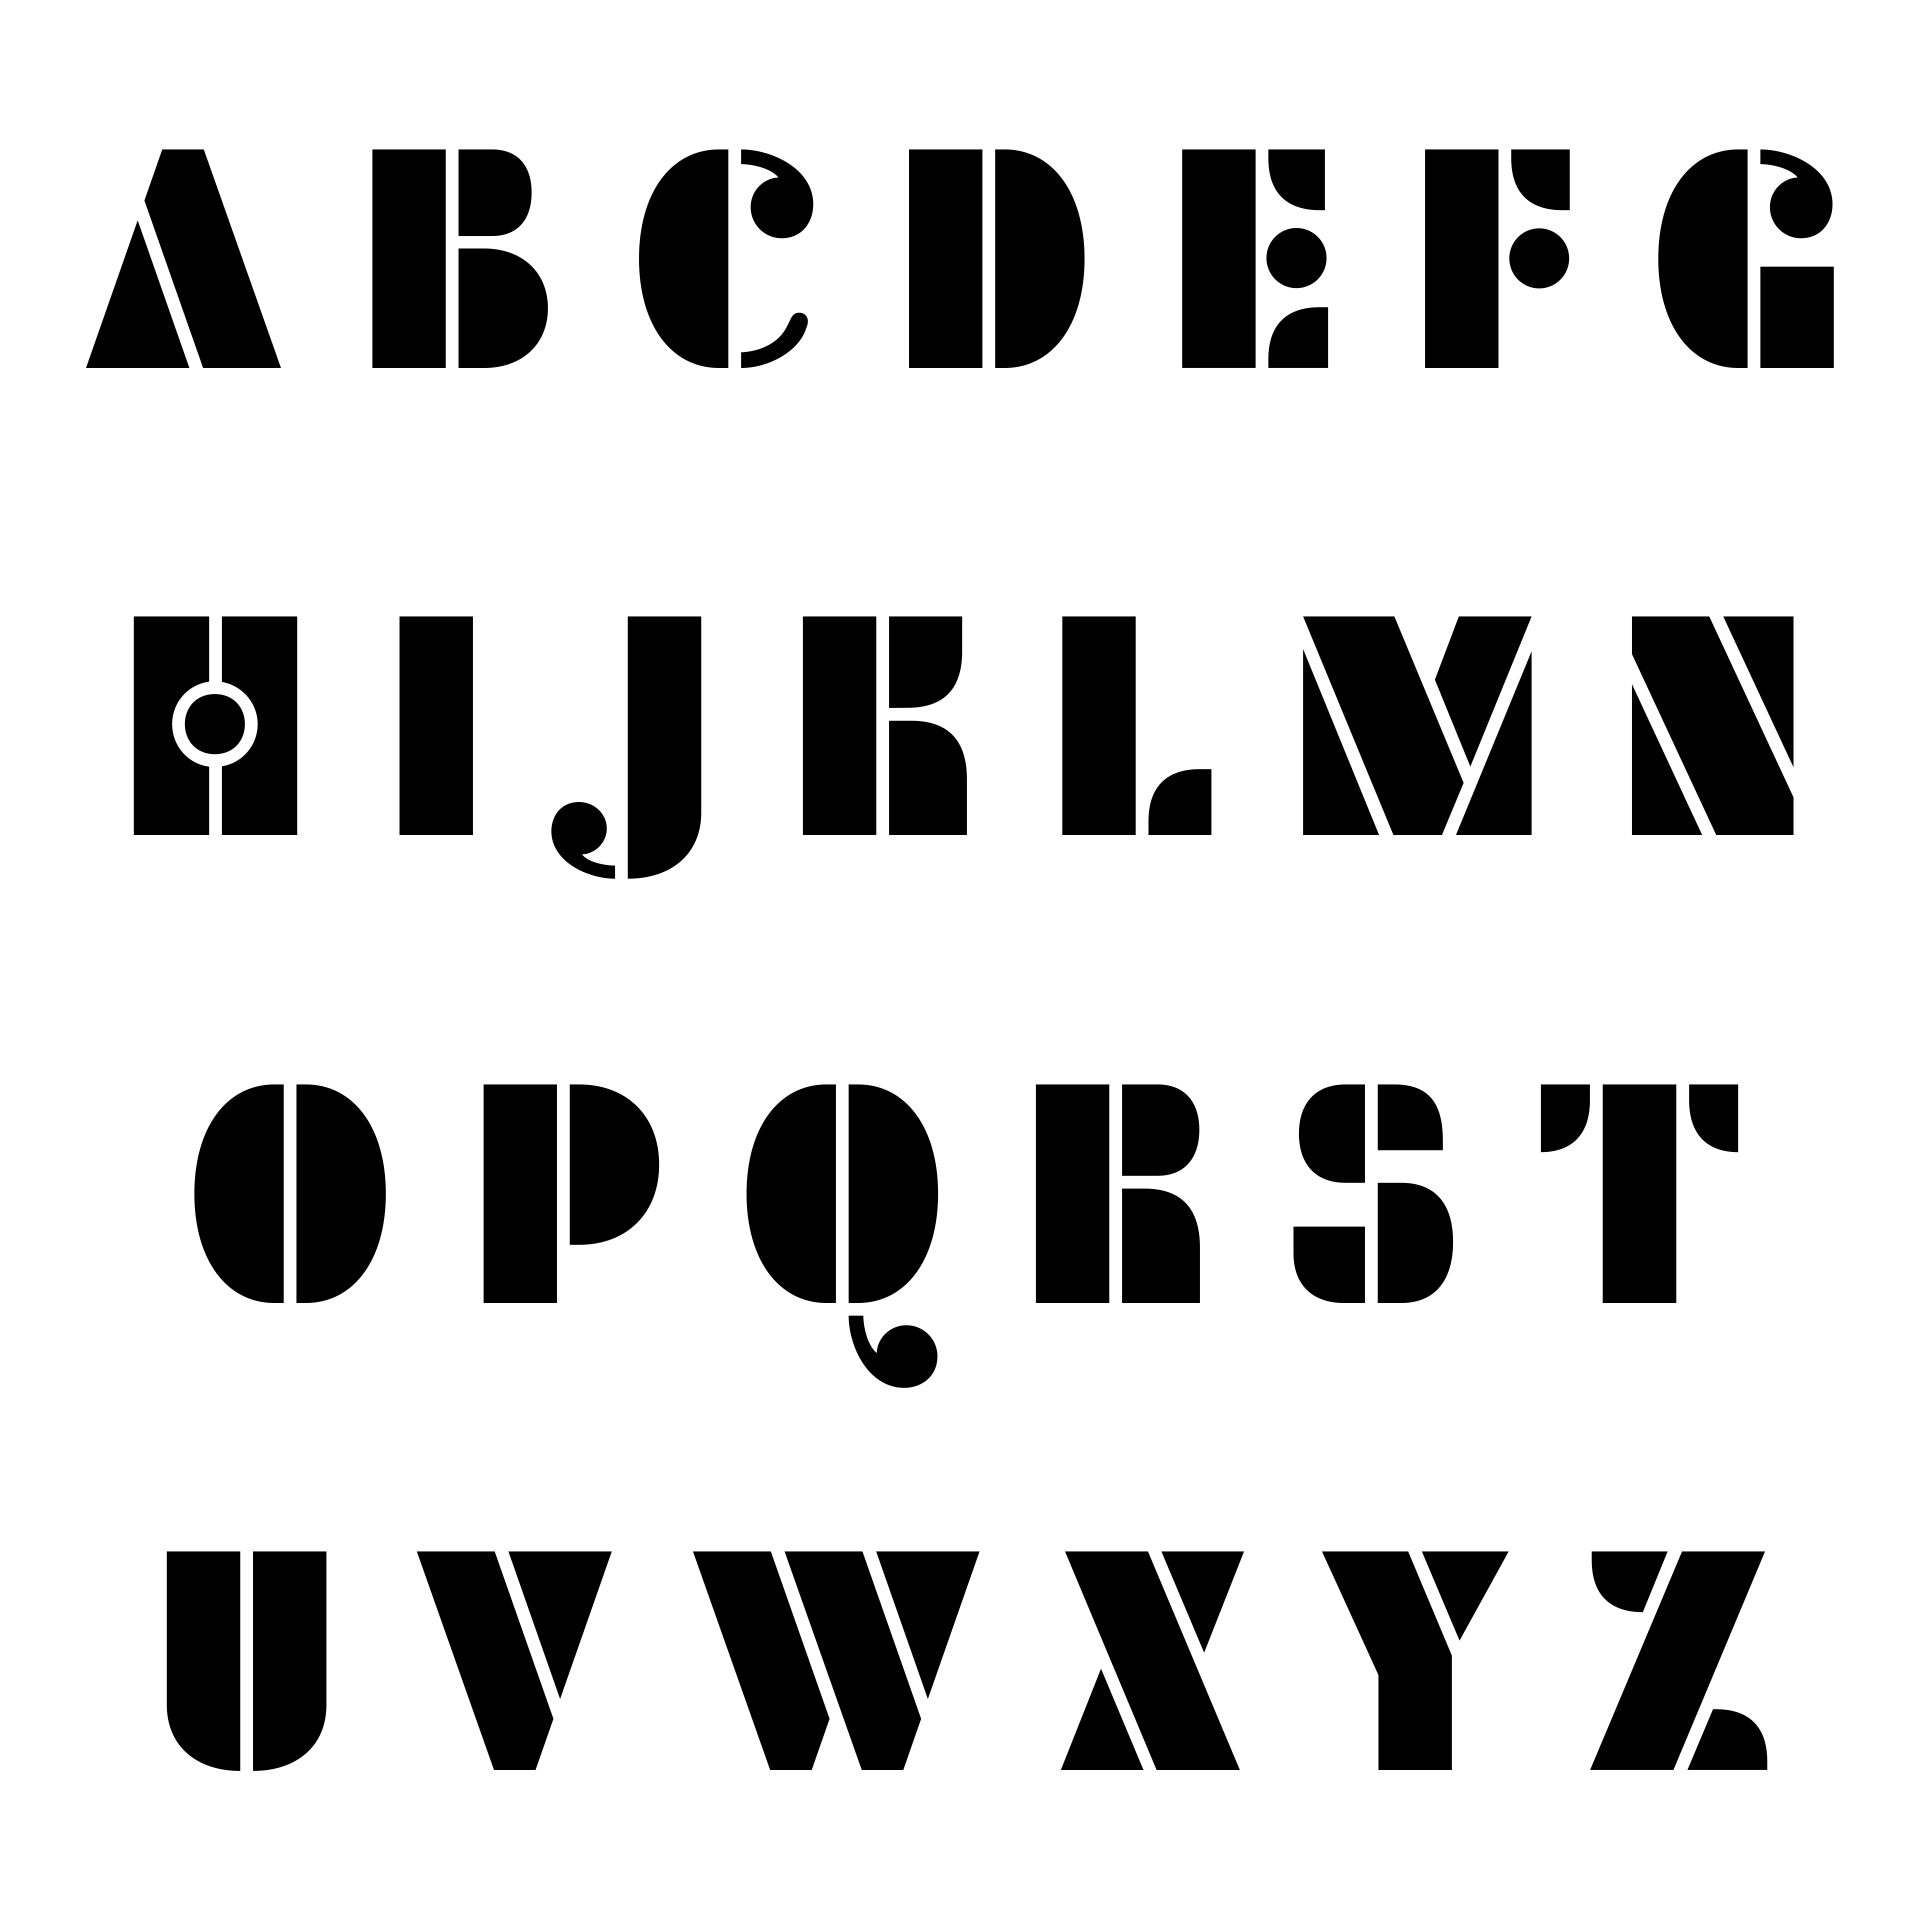 9 Best Images of Free Printable Fancy Alphabet Letters Templates - Free ...